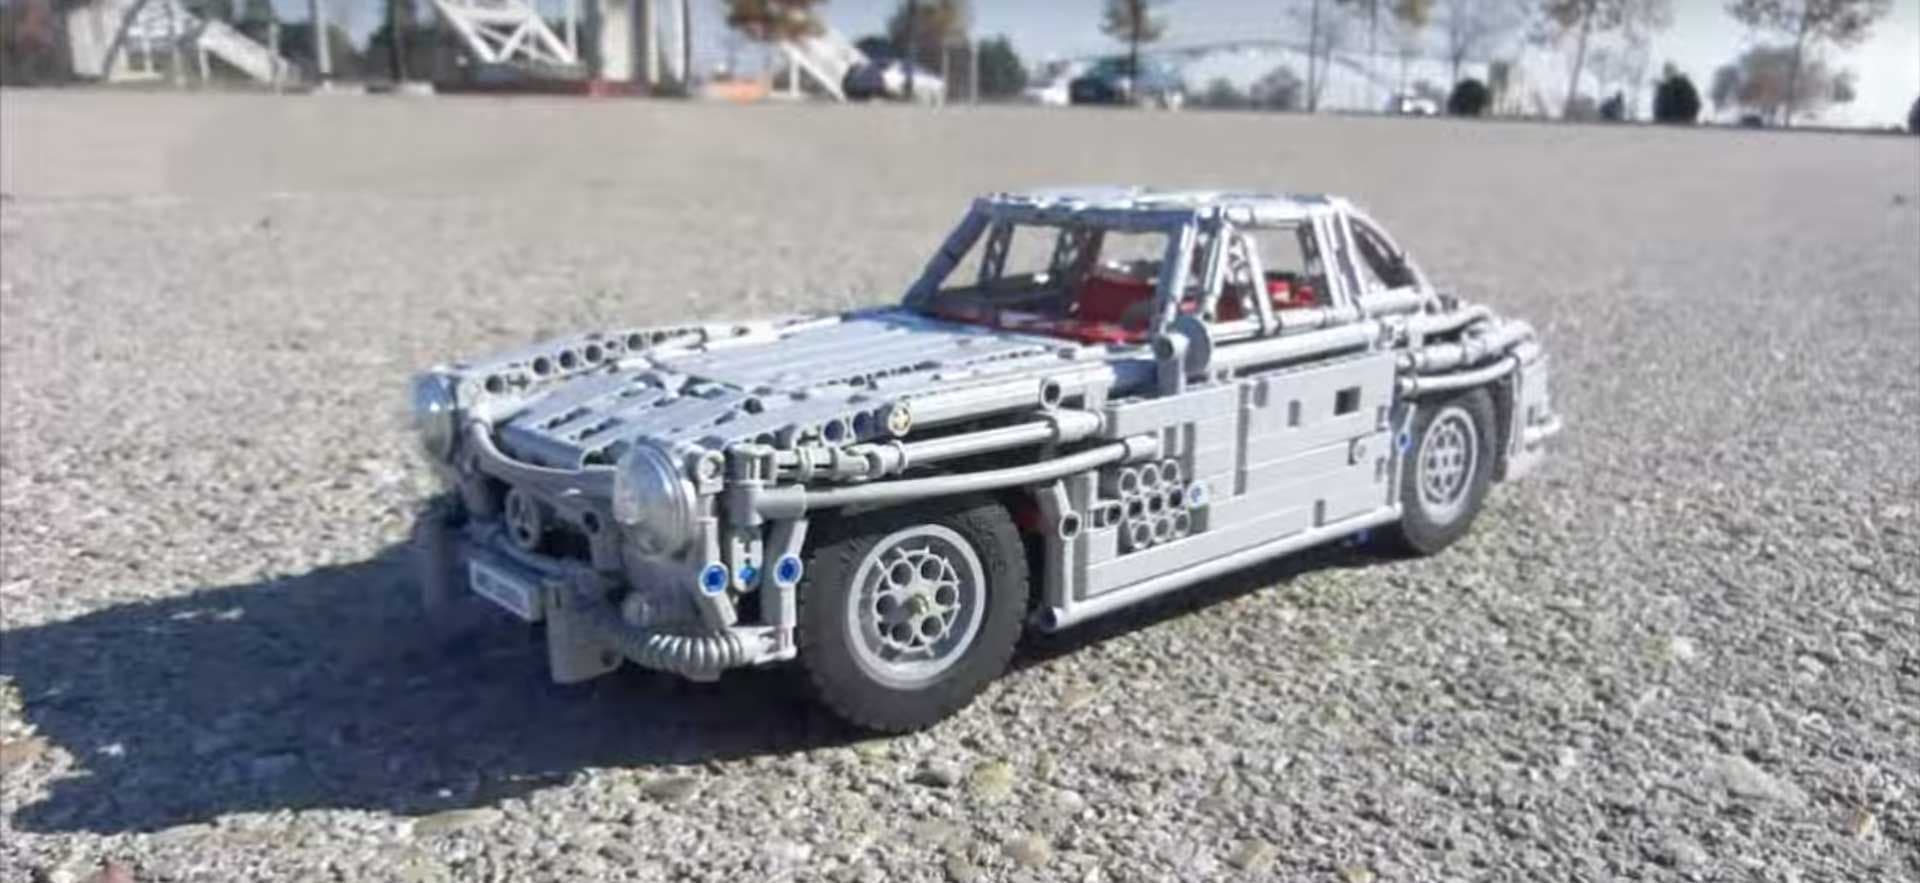 Lego My Gullwing: This Mercedes 300SL Model Can’t Be Beat